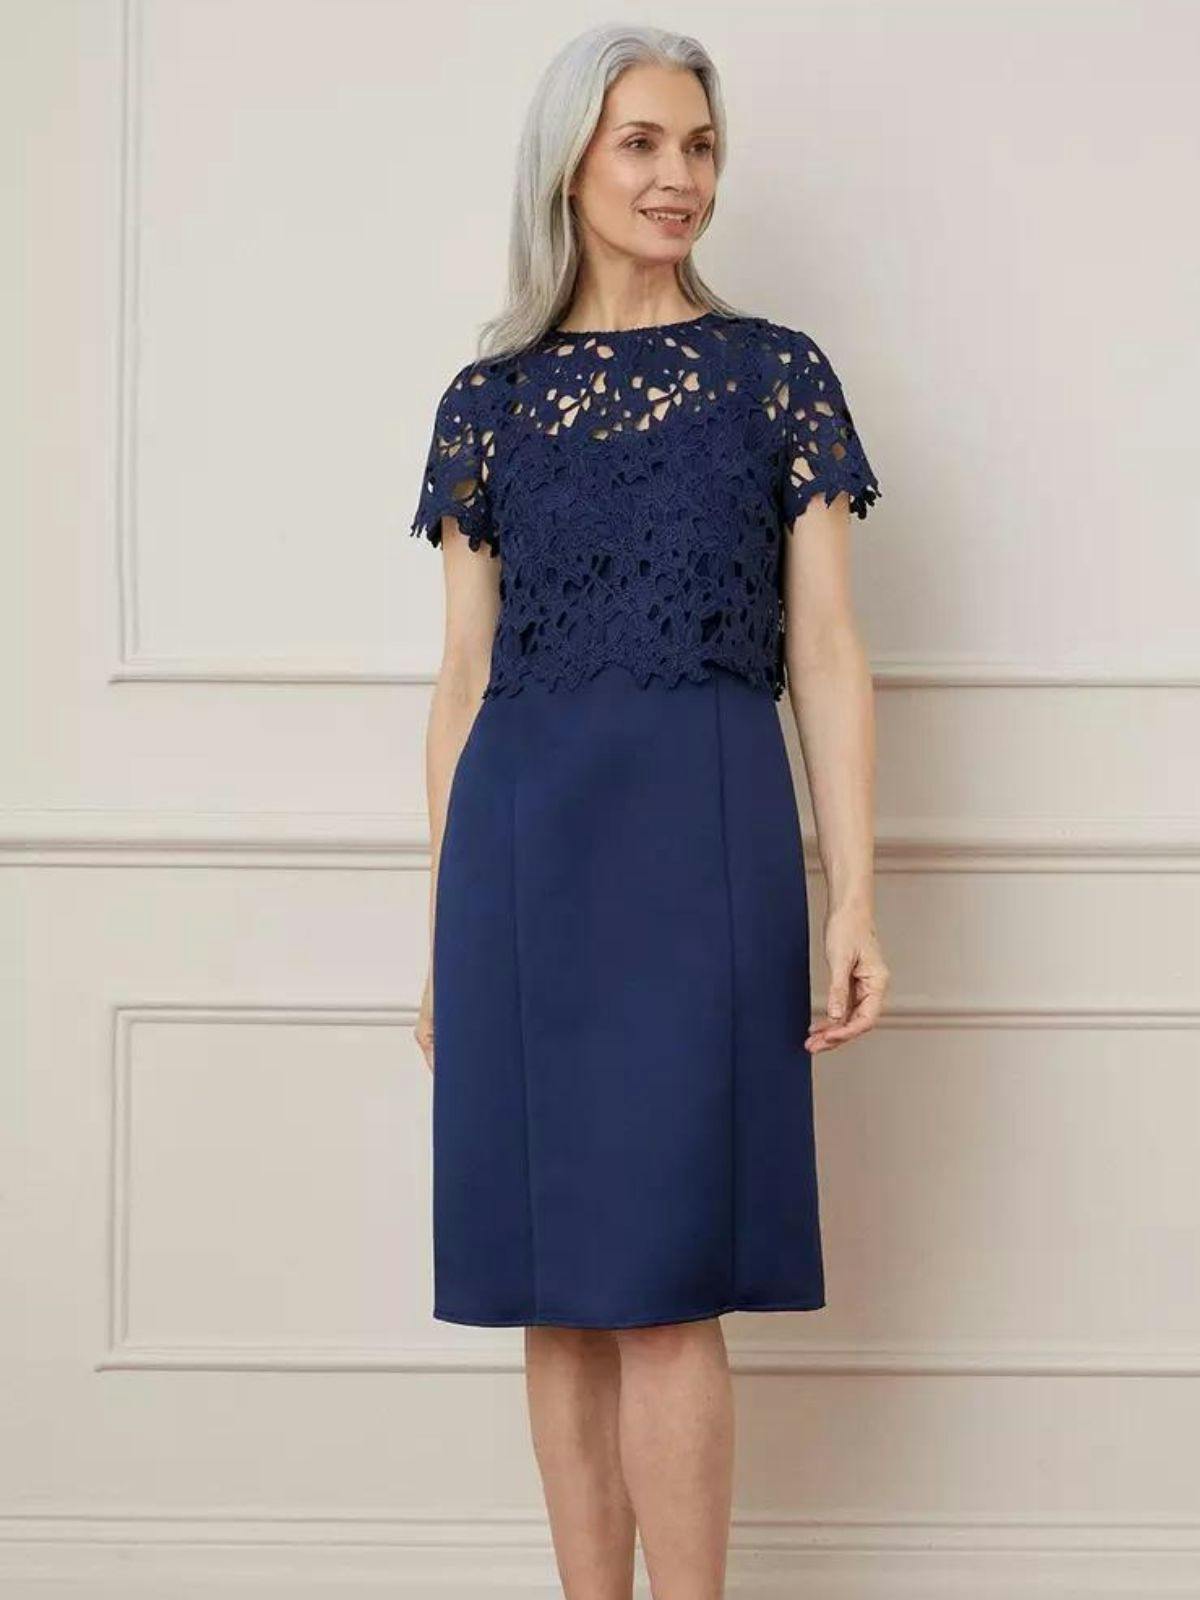 wedding guest outfits for over 50s